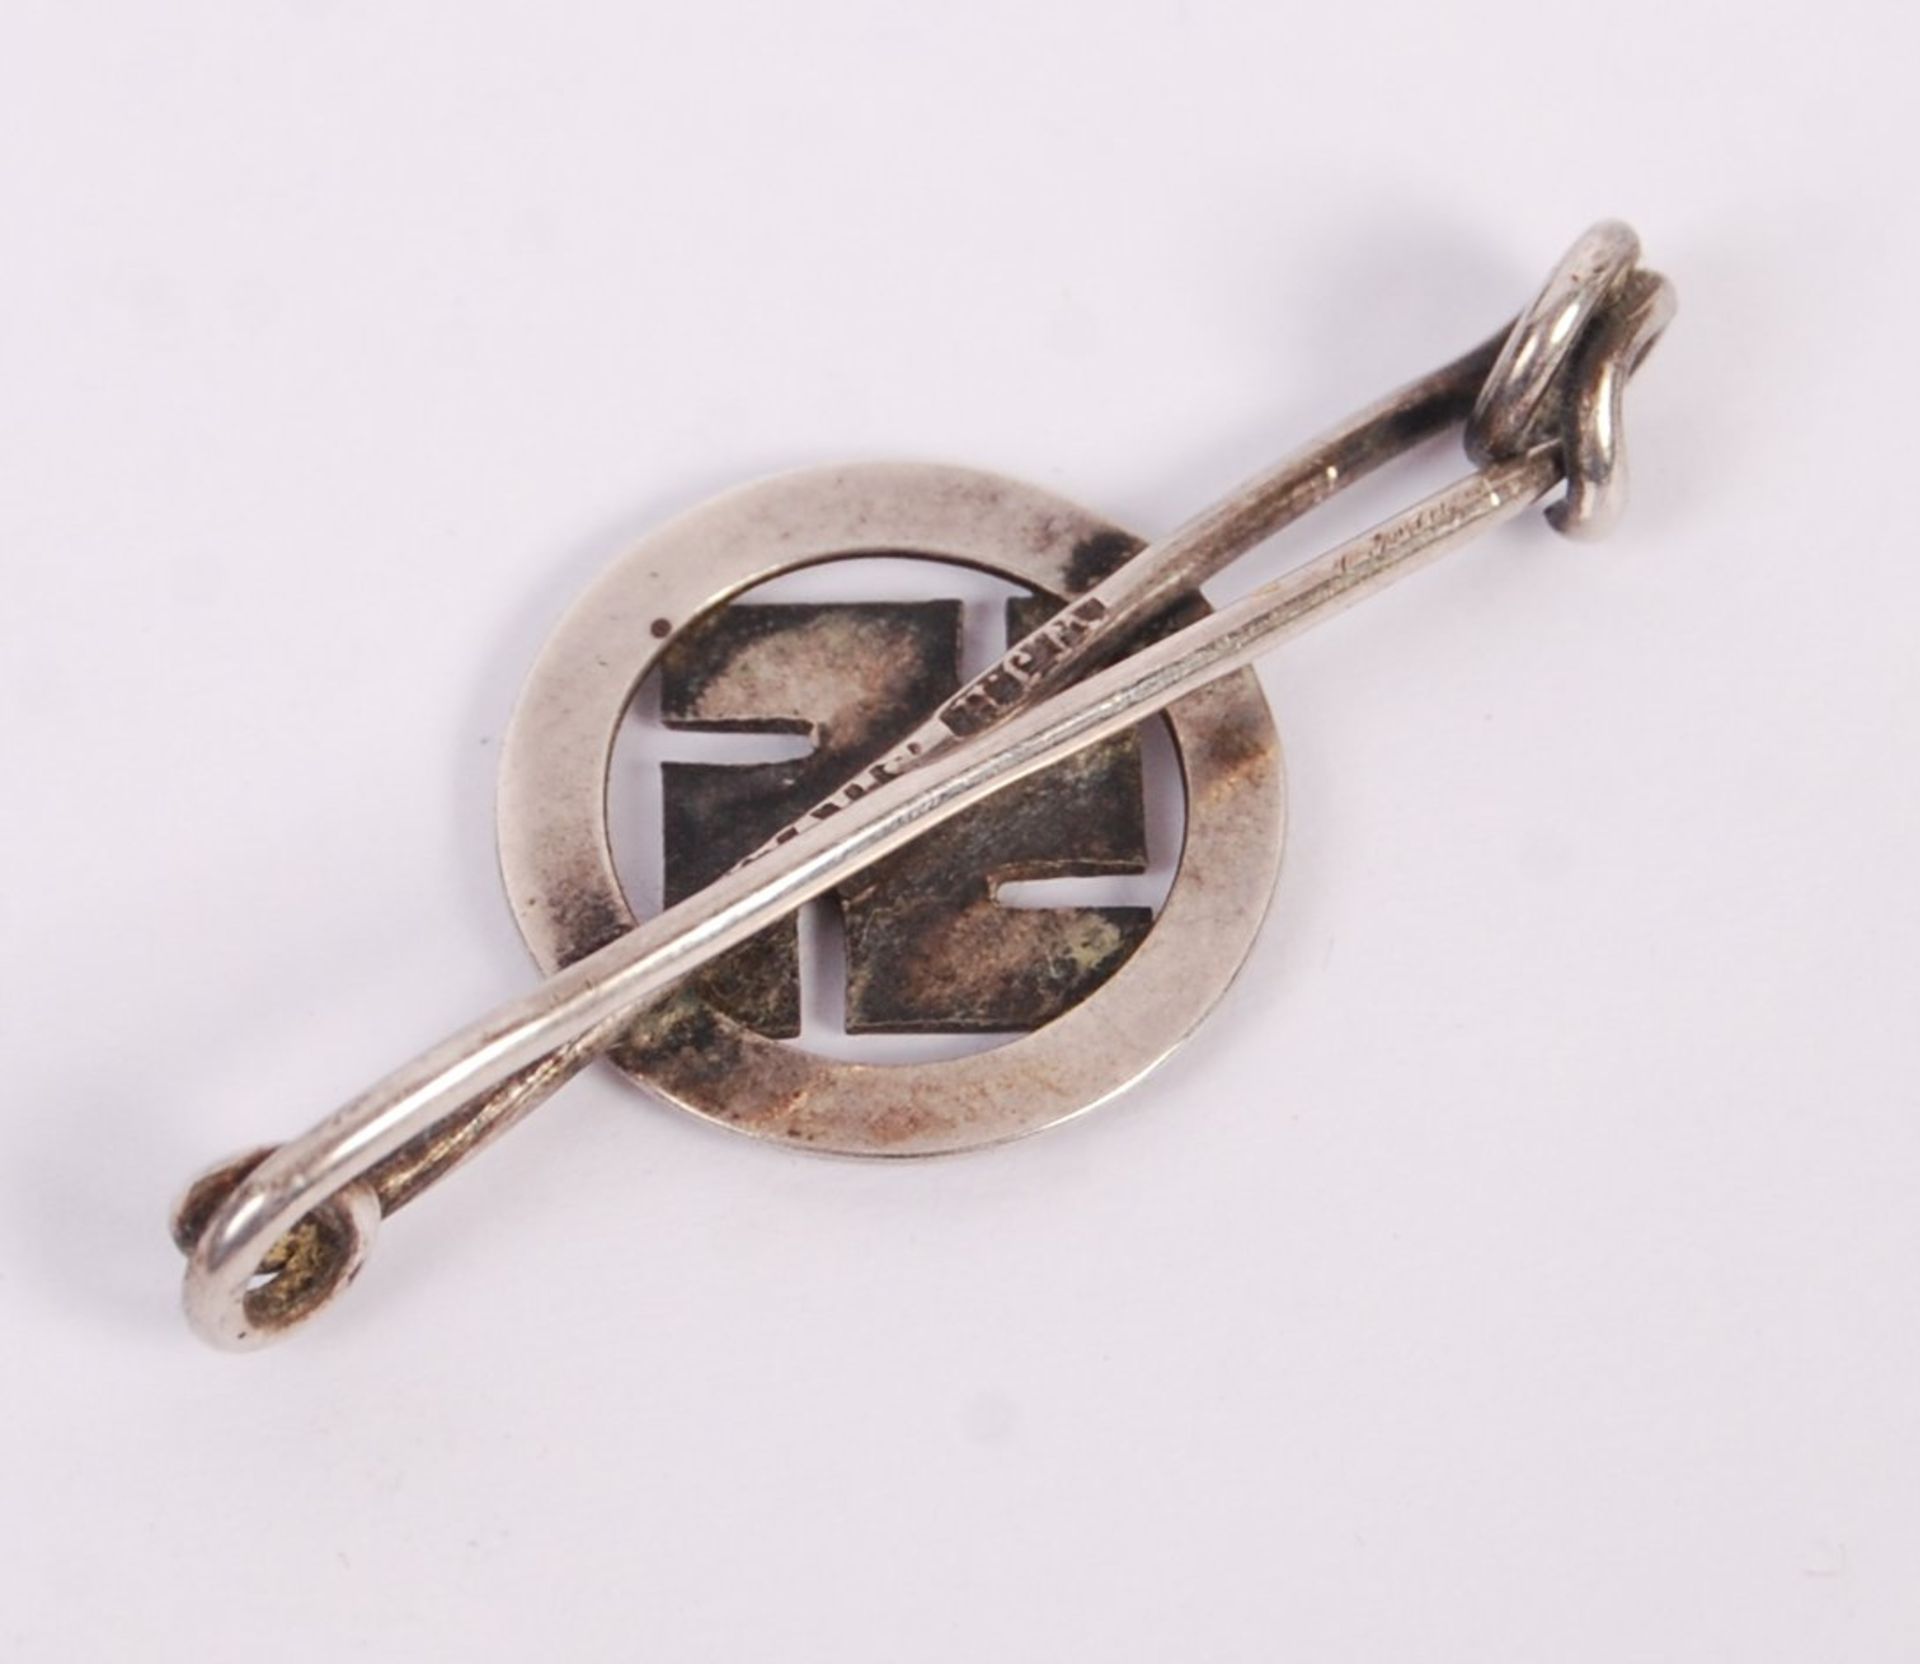 TWO 1930'S AVIATION GOOD LUCK SWASTIKA BADGES - Image 3 of 5